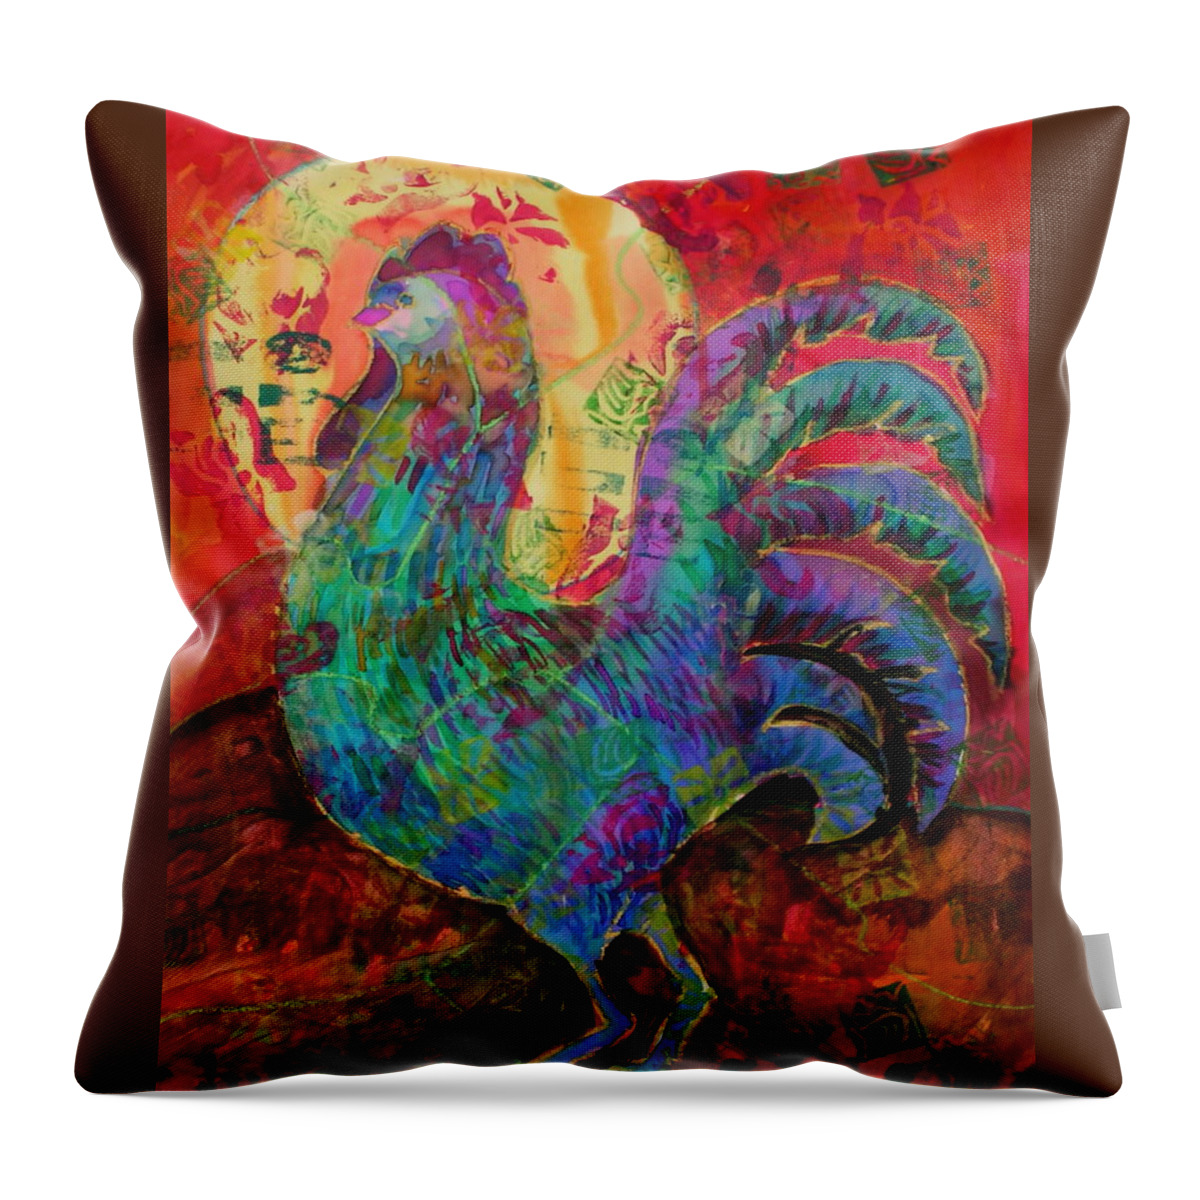 Chickens-rooster Throw Pillow featuring the mixed media Early Riser by Genie Morgan